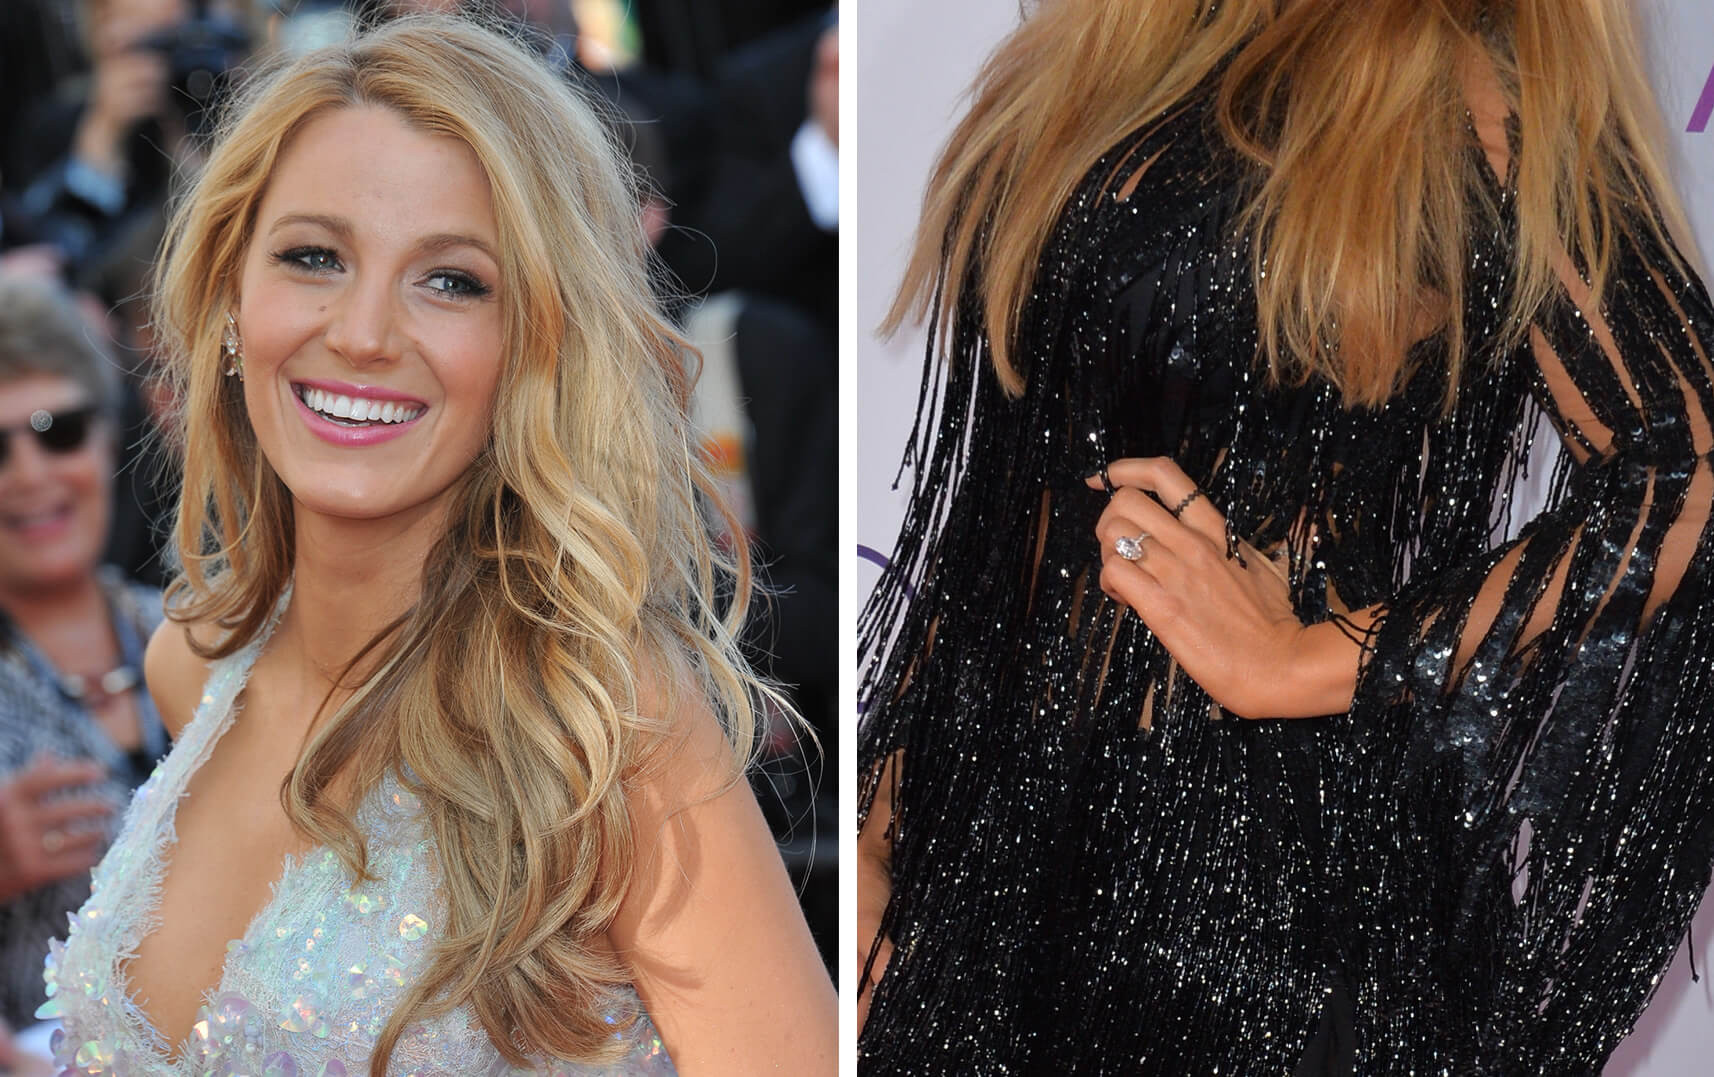 Blake Lively's Engagement Ring | Overview